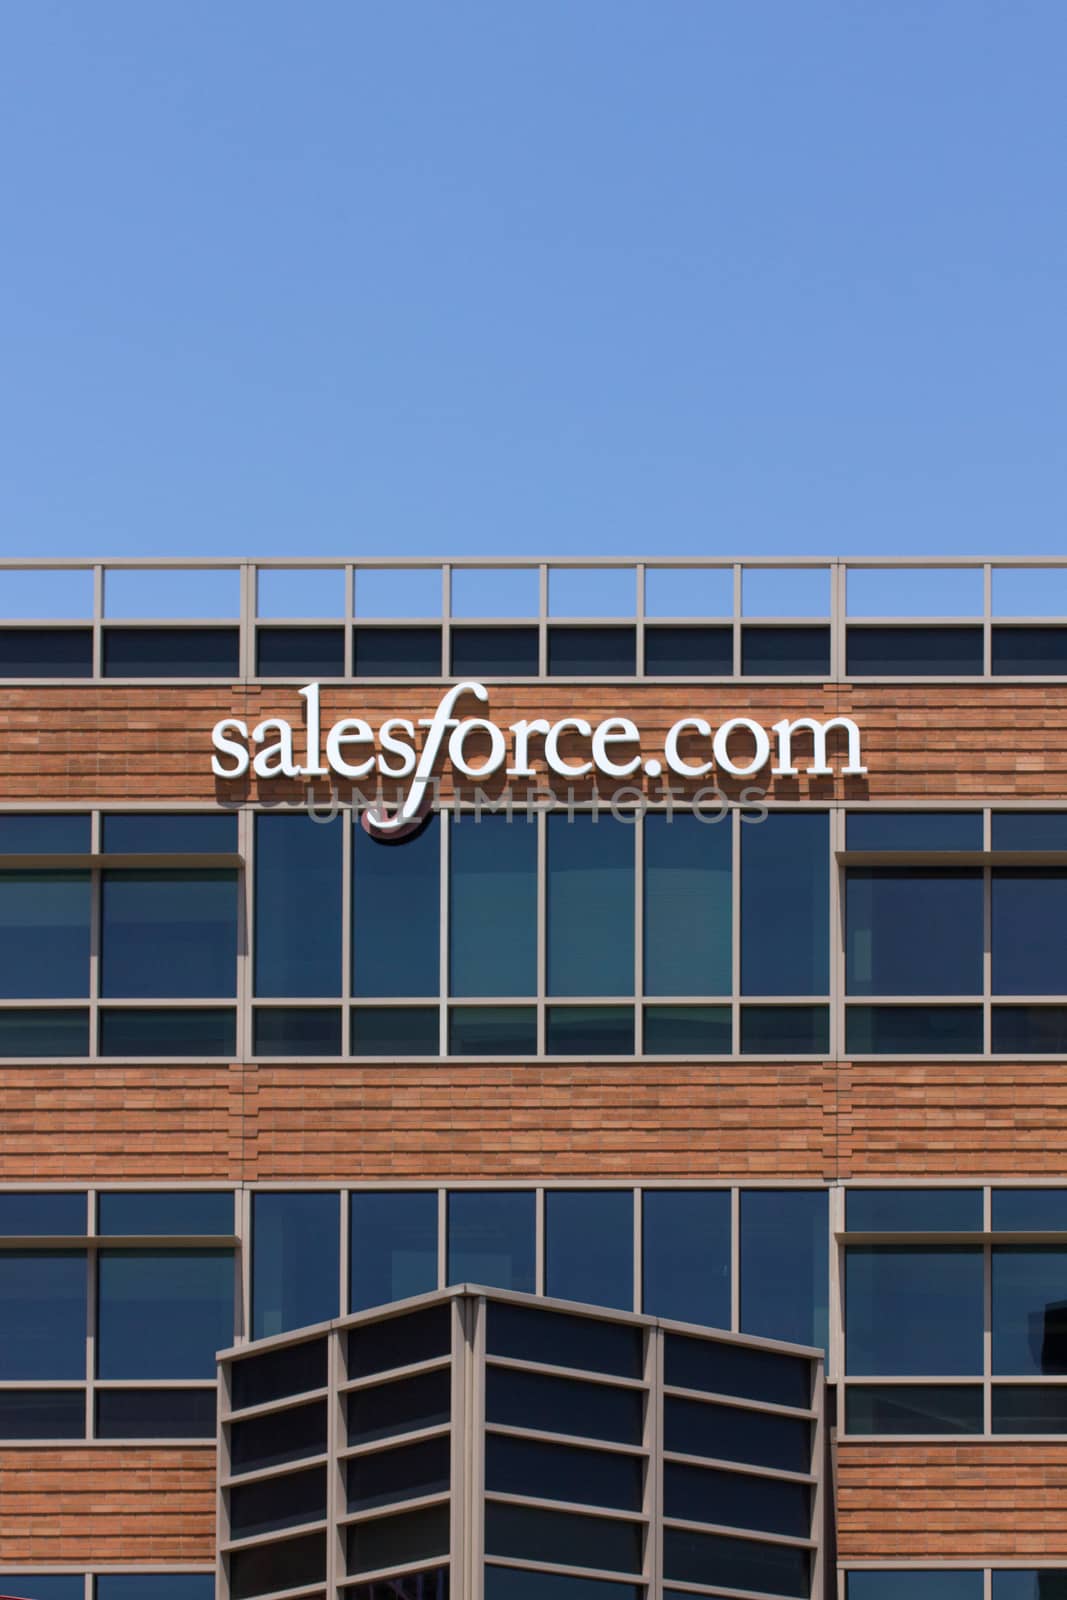 Salesforce.com Corporate Headquarters by wolterk